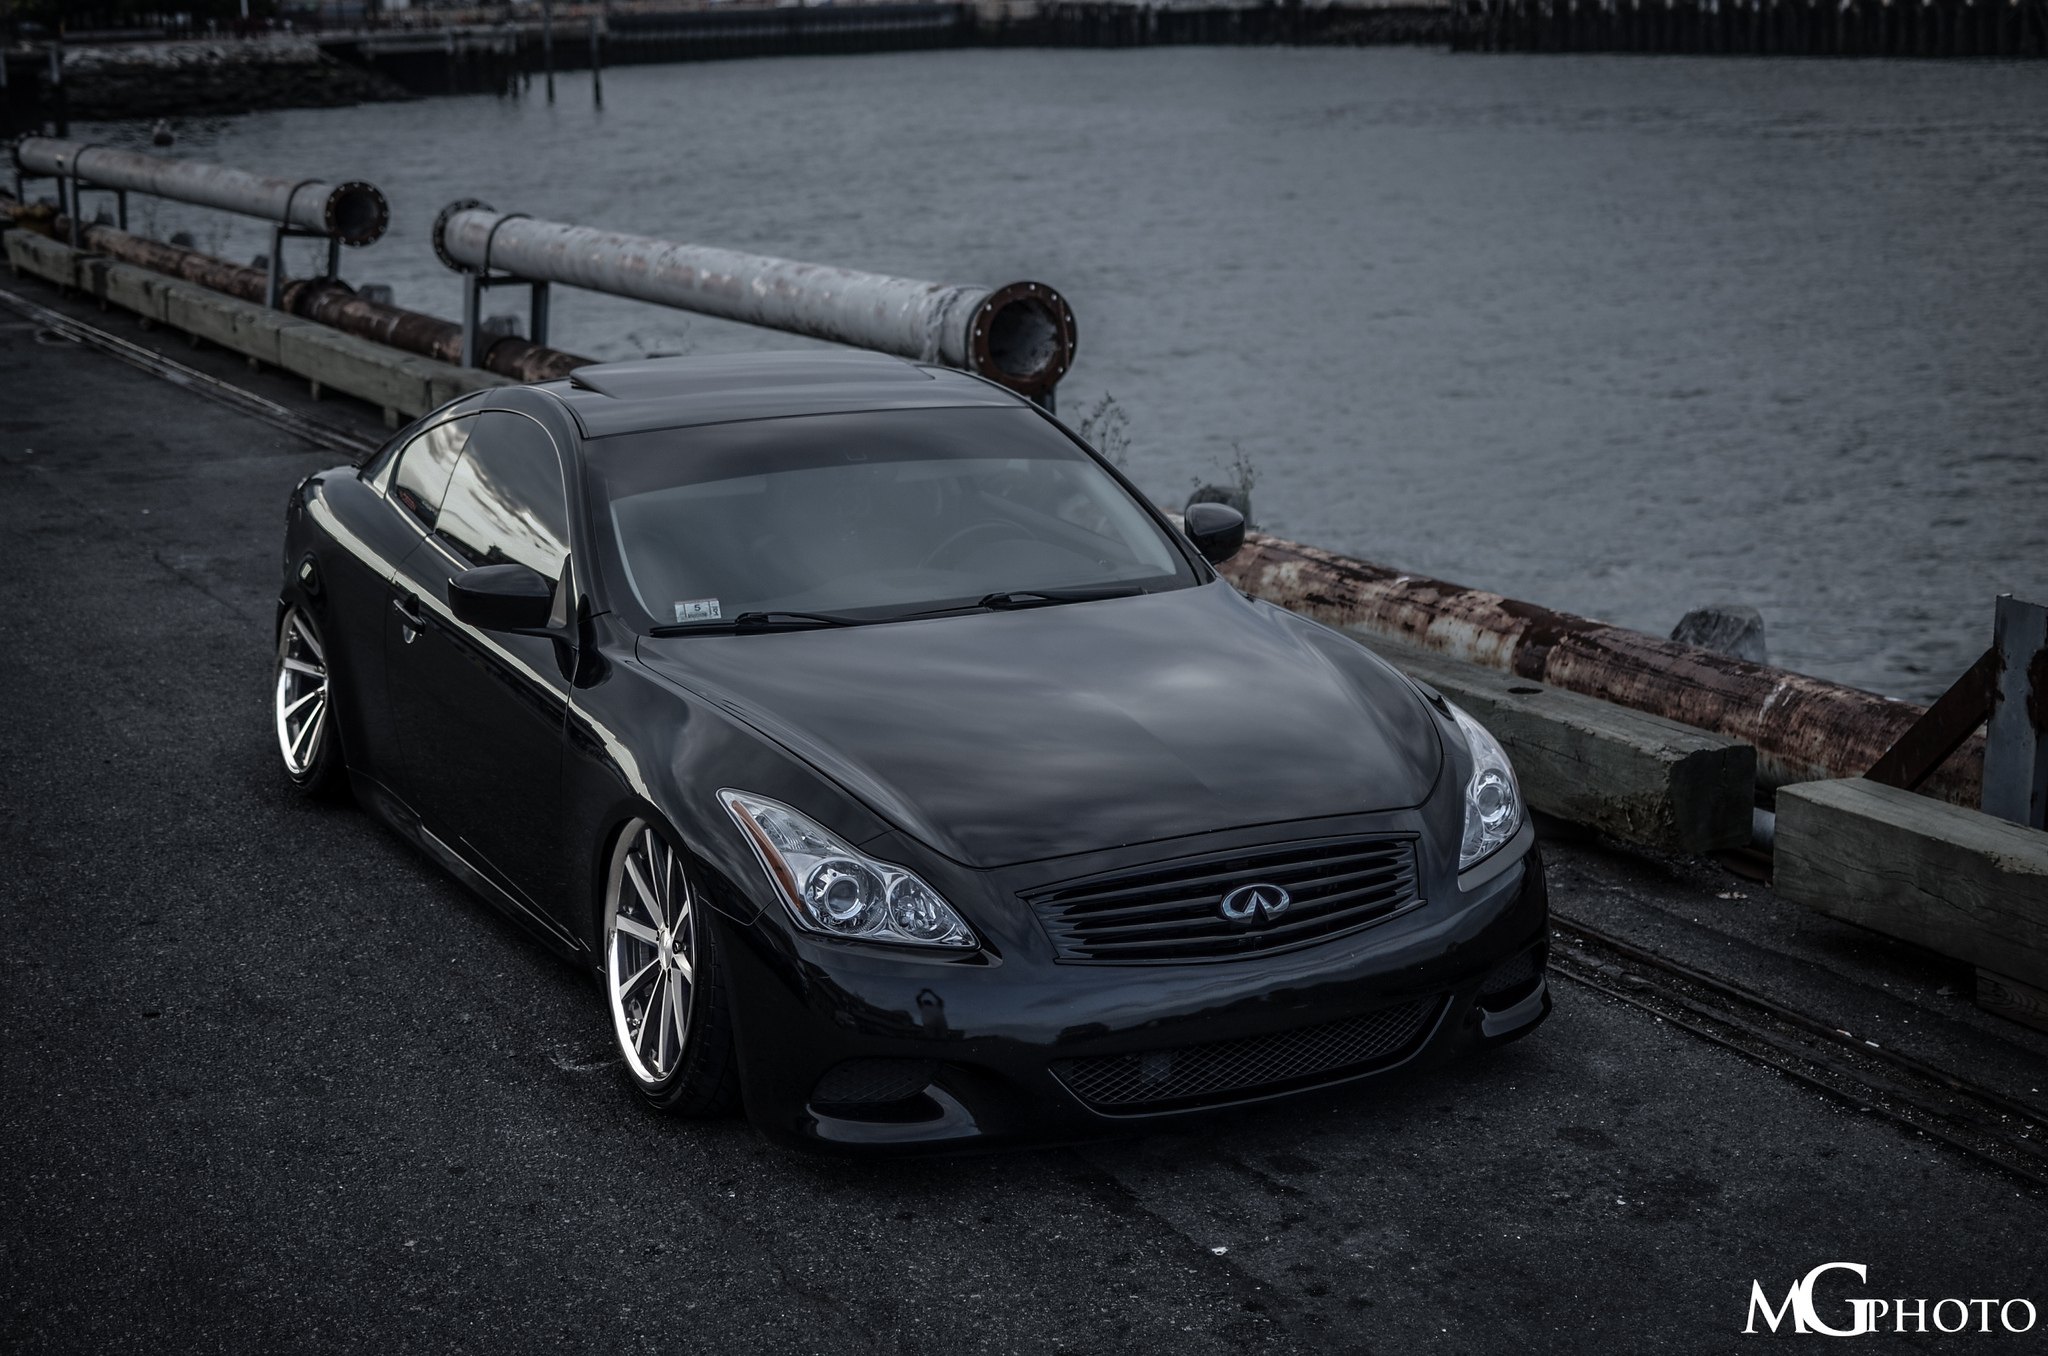 Black Infiniti G37 with Blacked Out Grille - Photo by Matthew Gaumont